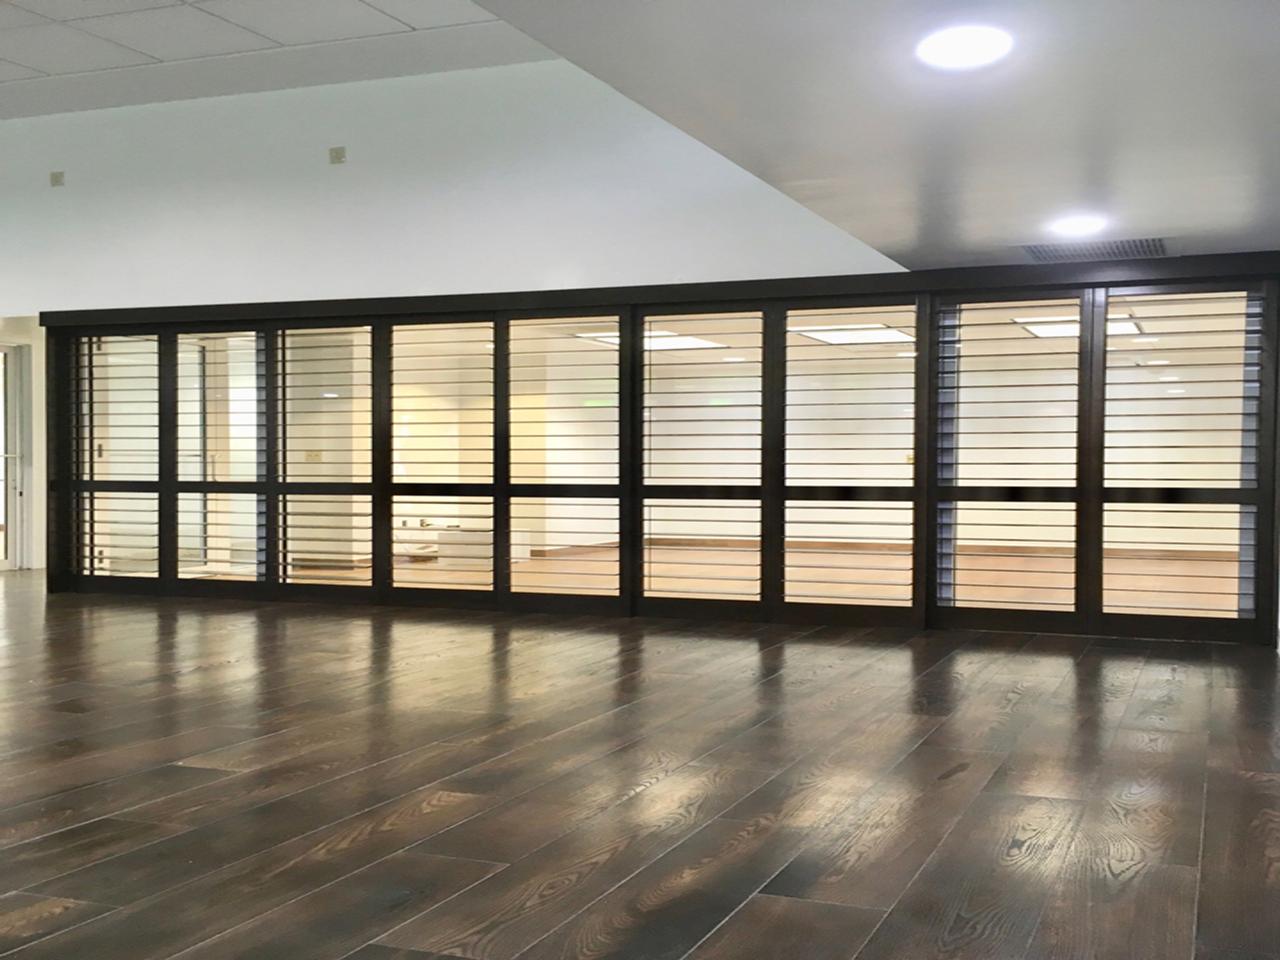 Room divided with plantation shutters with bypass doors